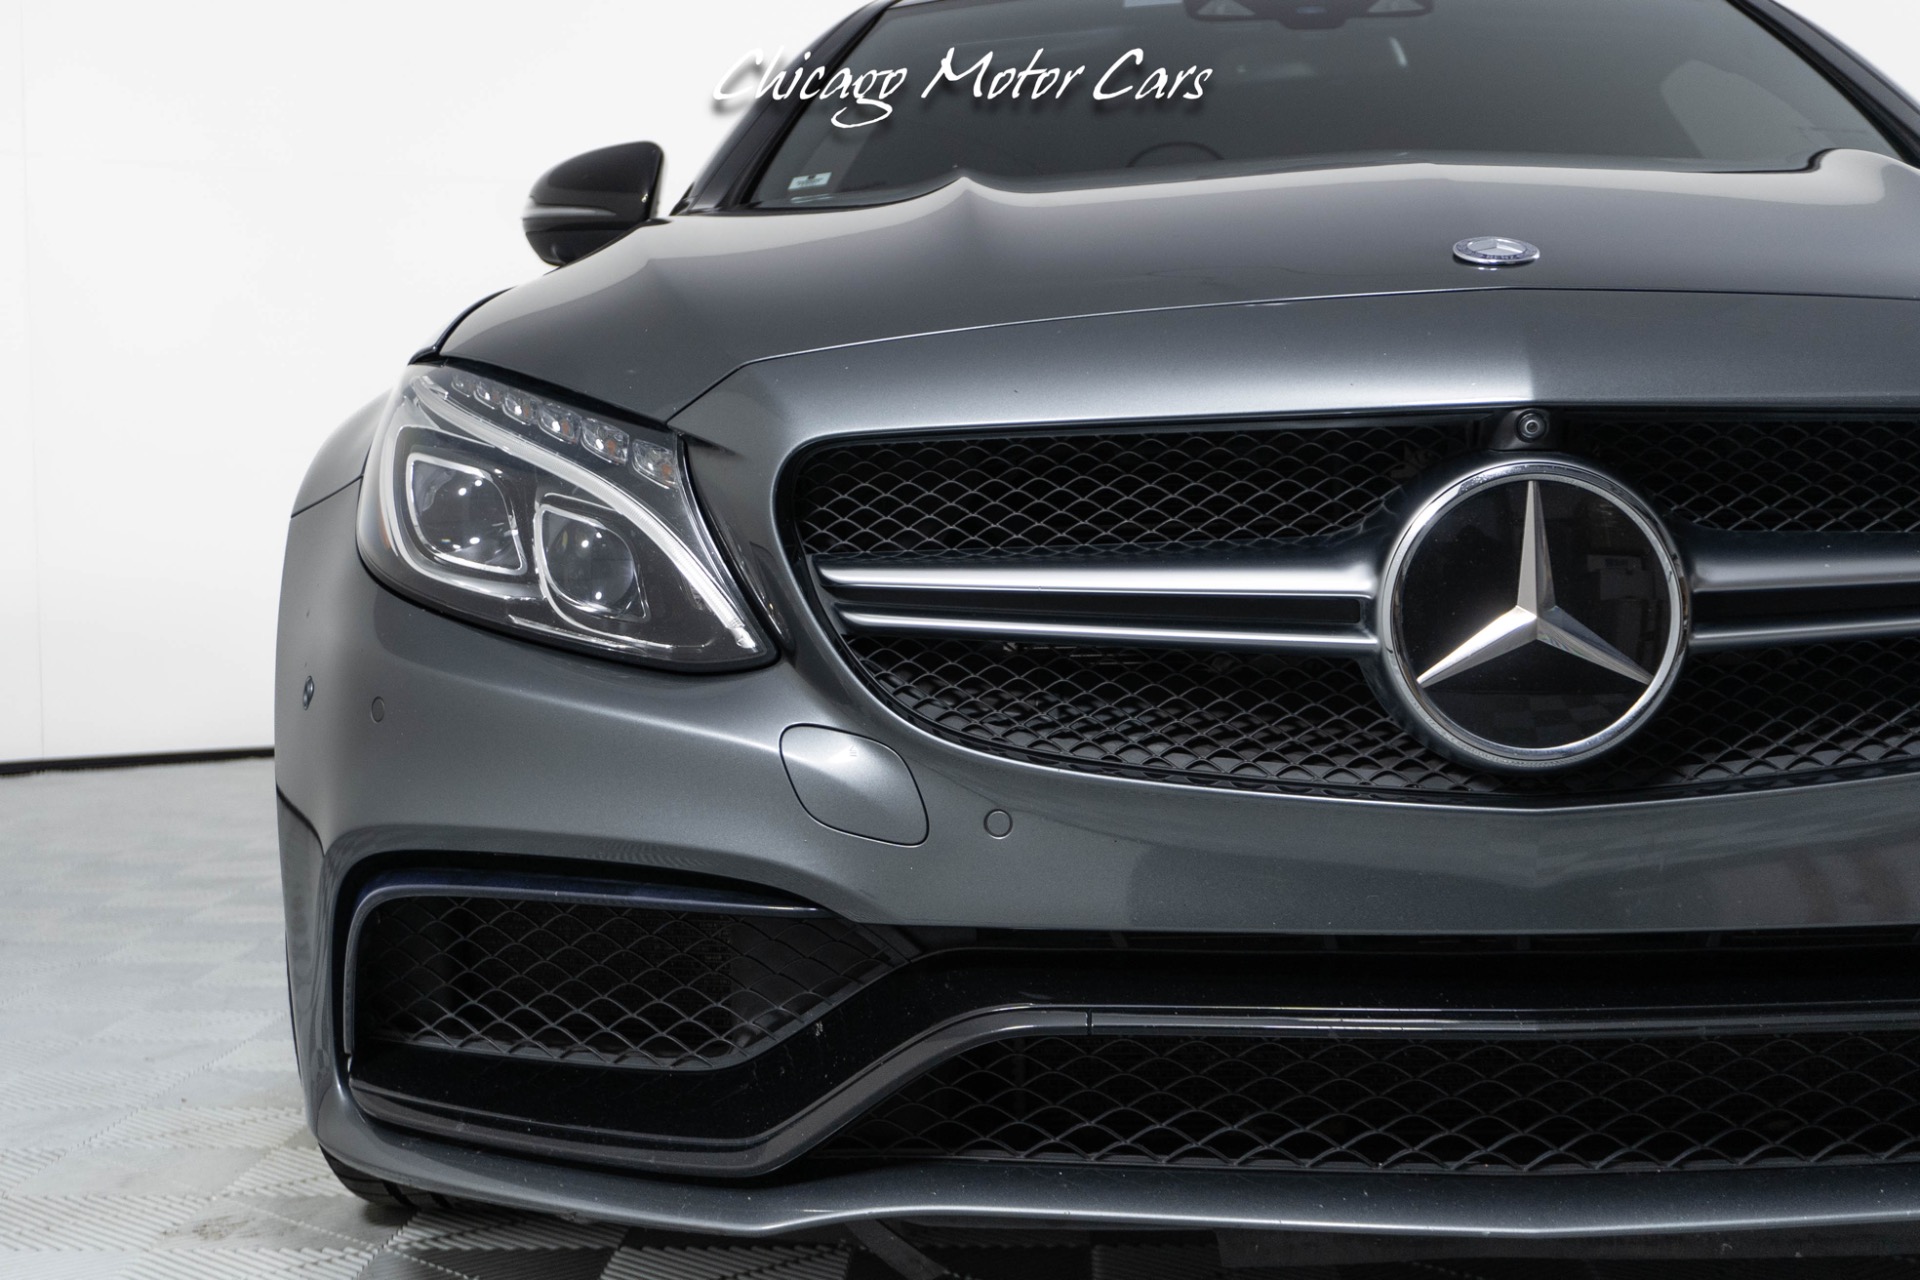 Used-2017-Mercedes-Benz-AMG-C63S-C-Class-Coupe-Premium-Package-AMG-Forged-Wheels-Carbon-Fiber-Trim-Loaded